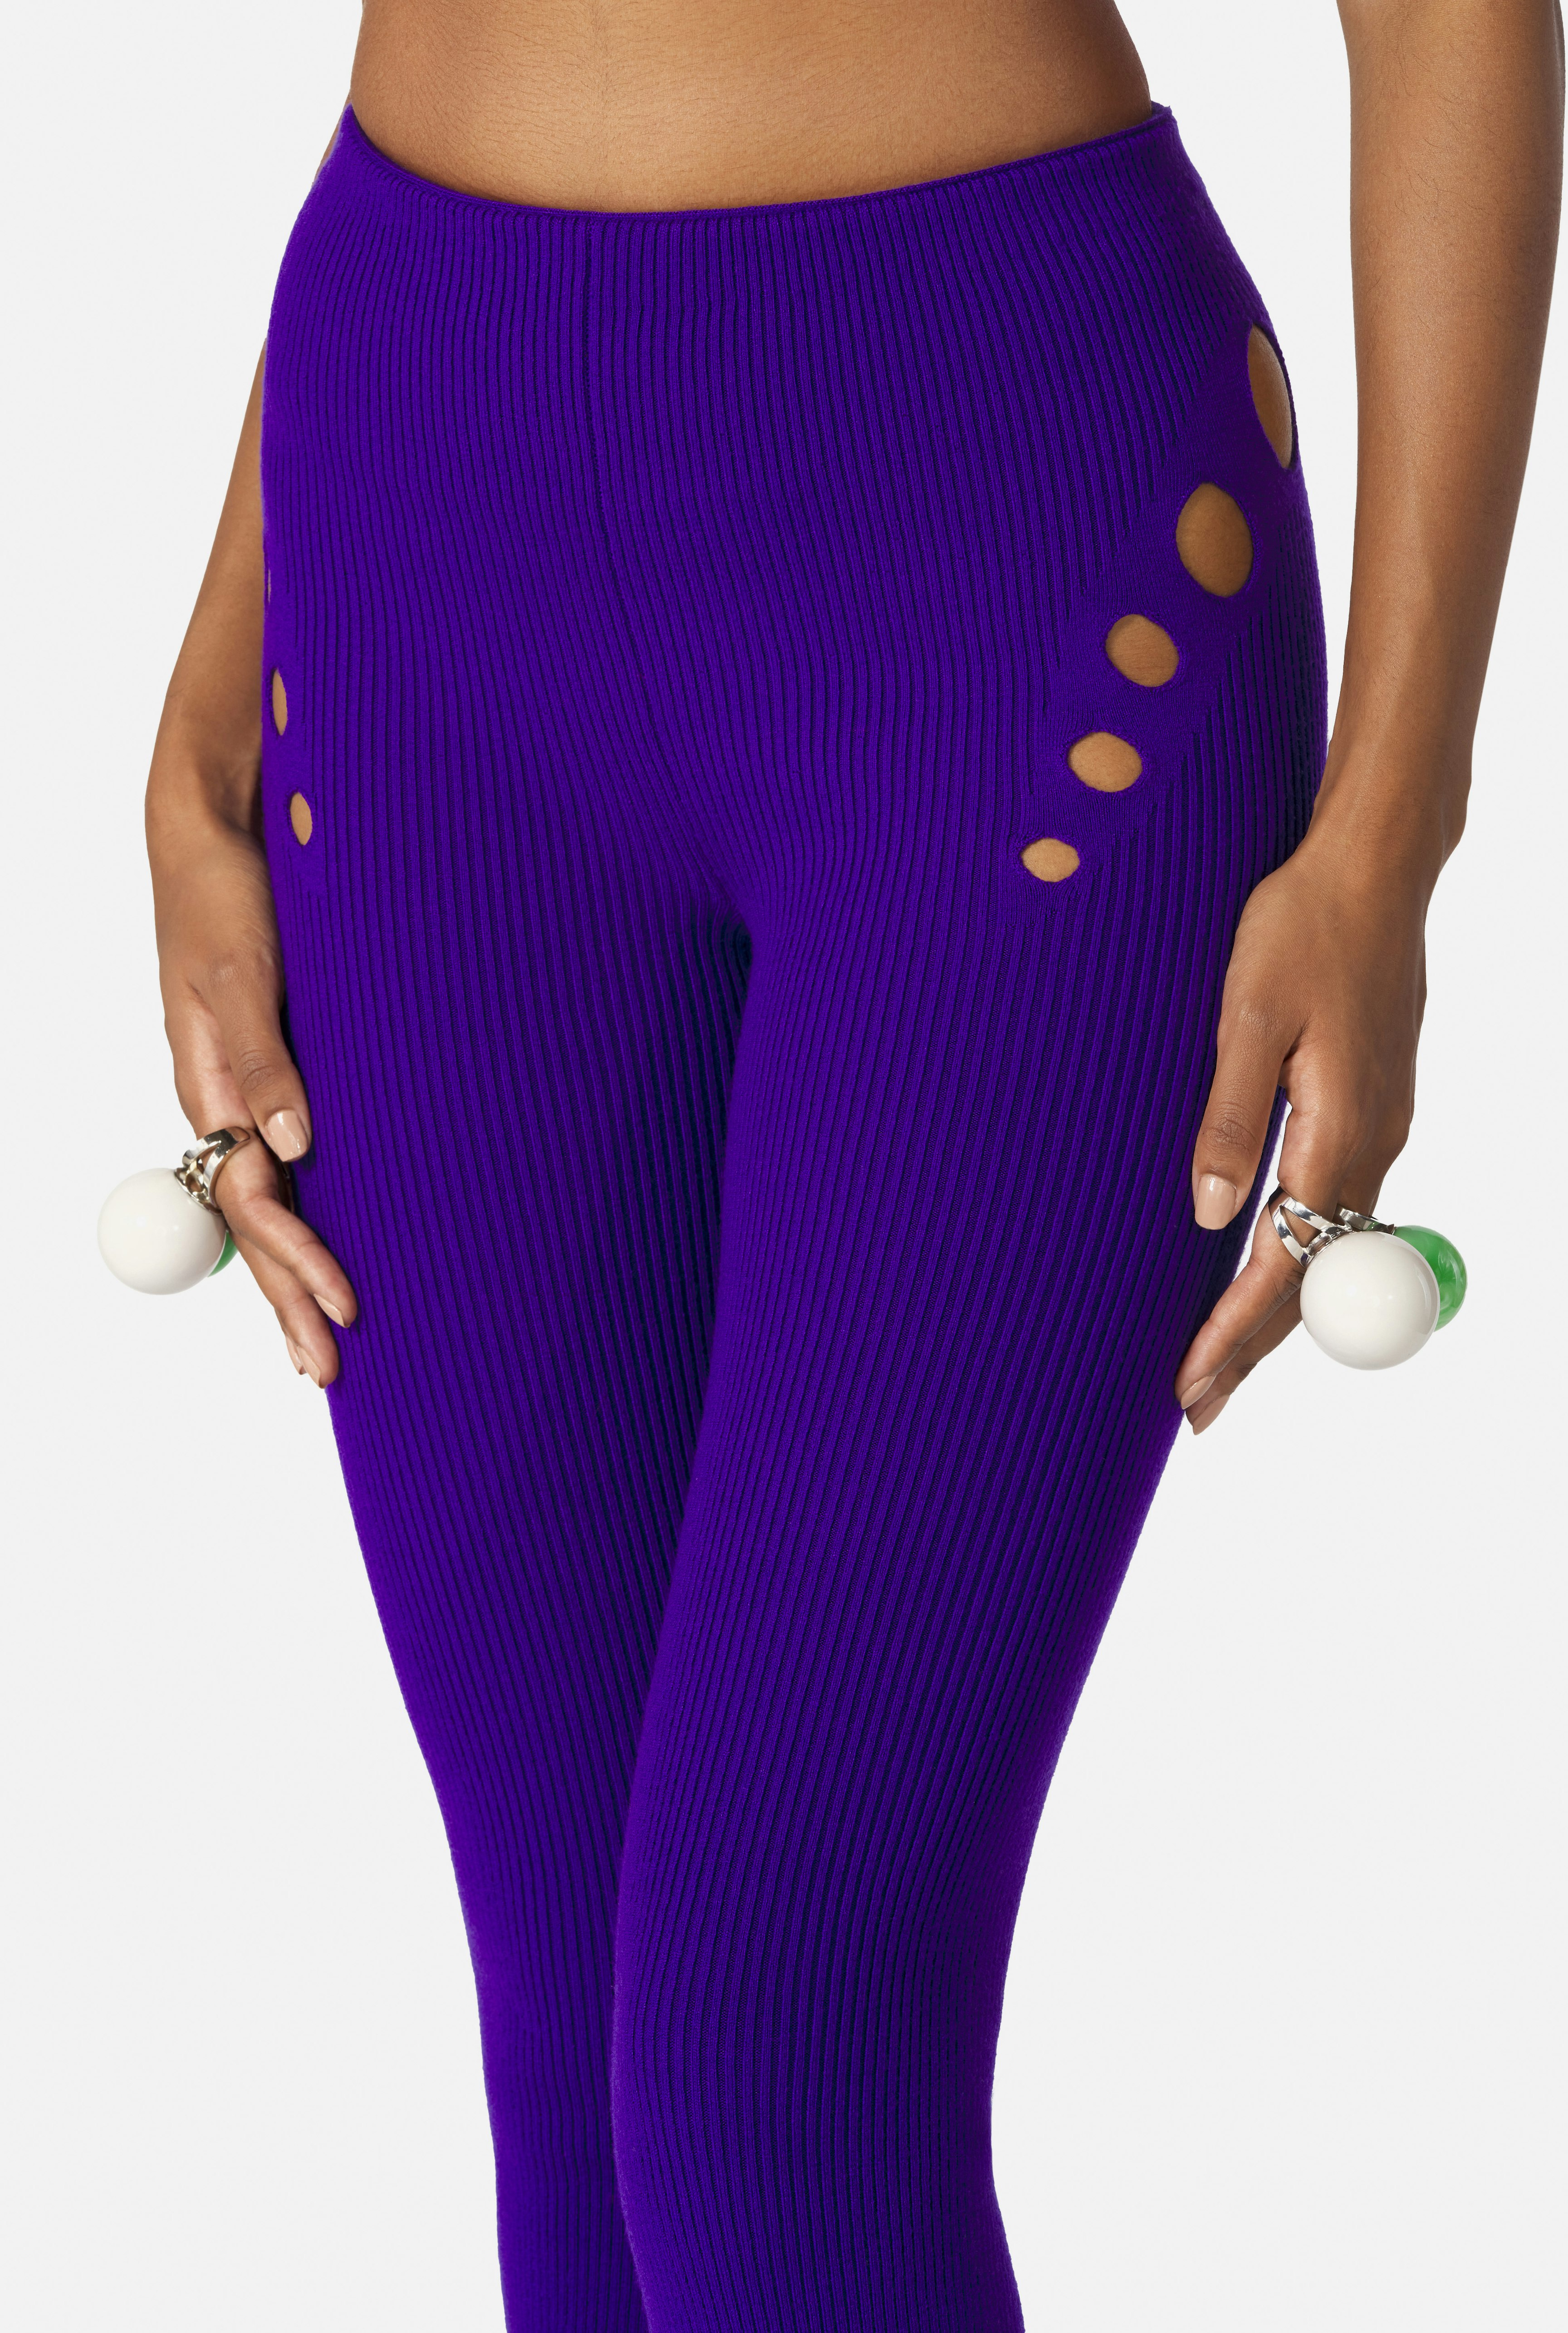 The Purple Openworked Knit Pants